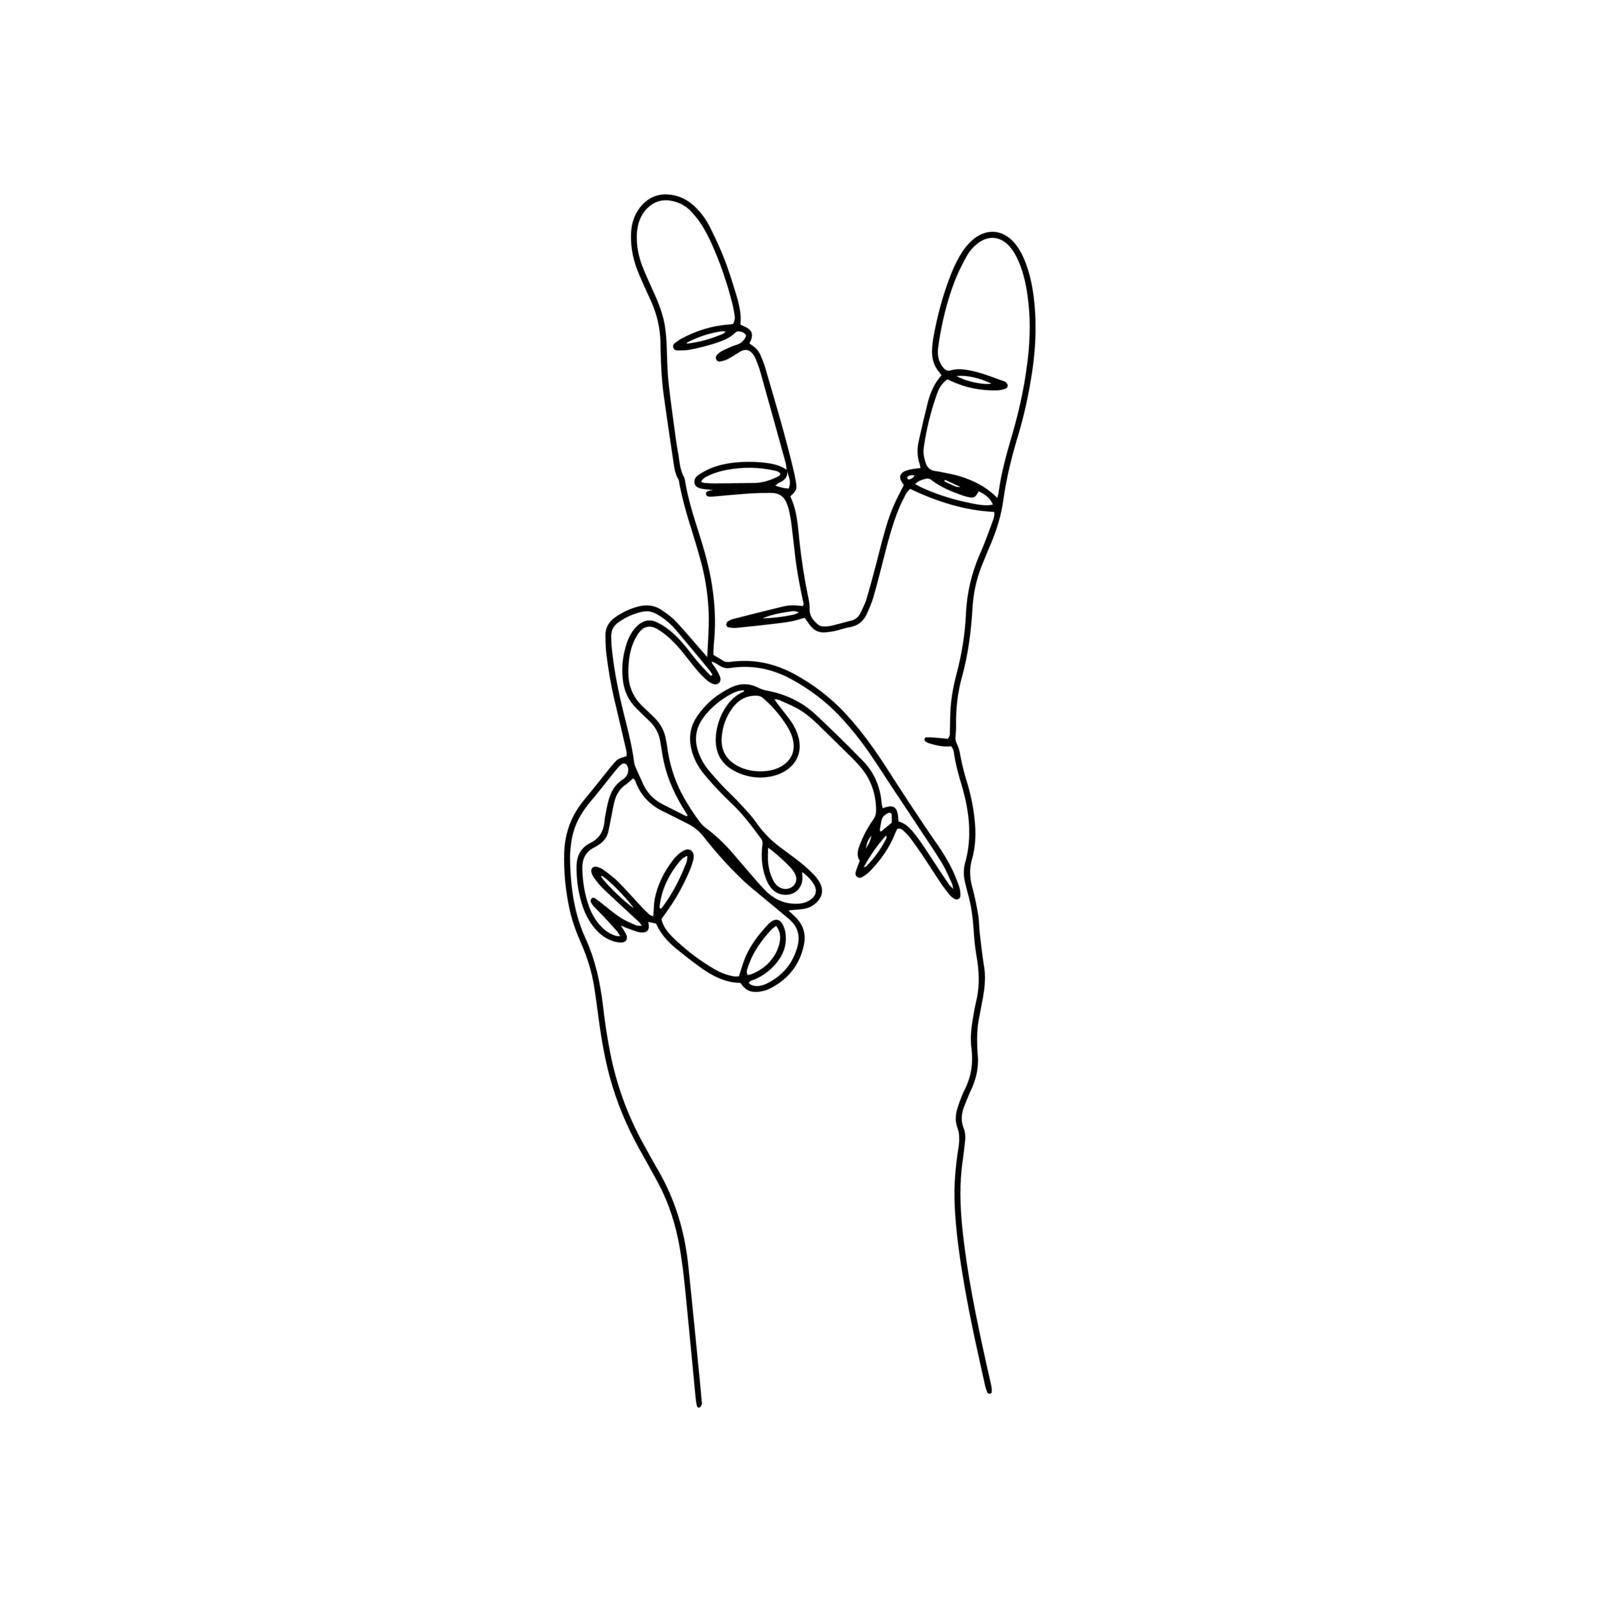 Hand gesture symbol of victory line art vector. Contour graphic sign one line. Popular symbols thumbs up isolated illustration